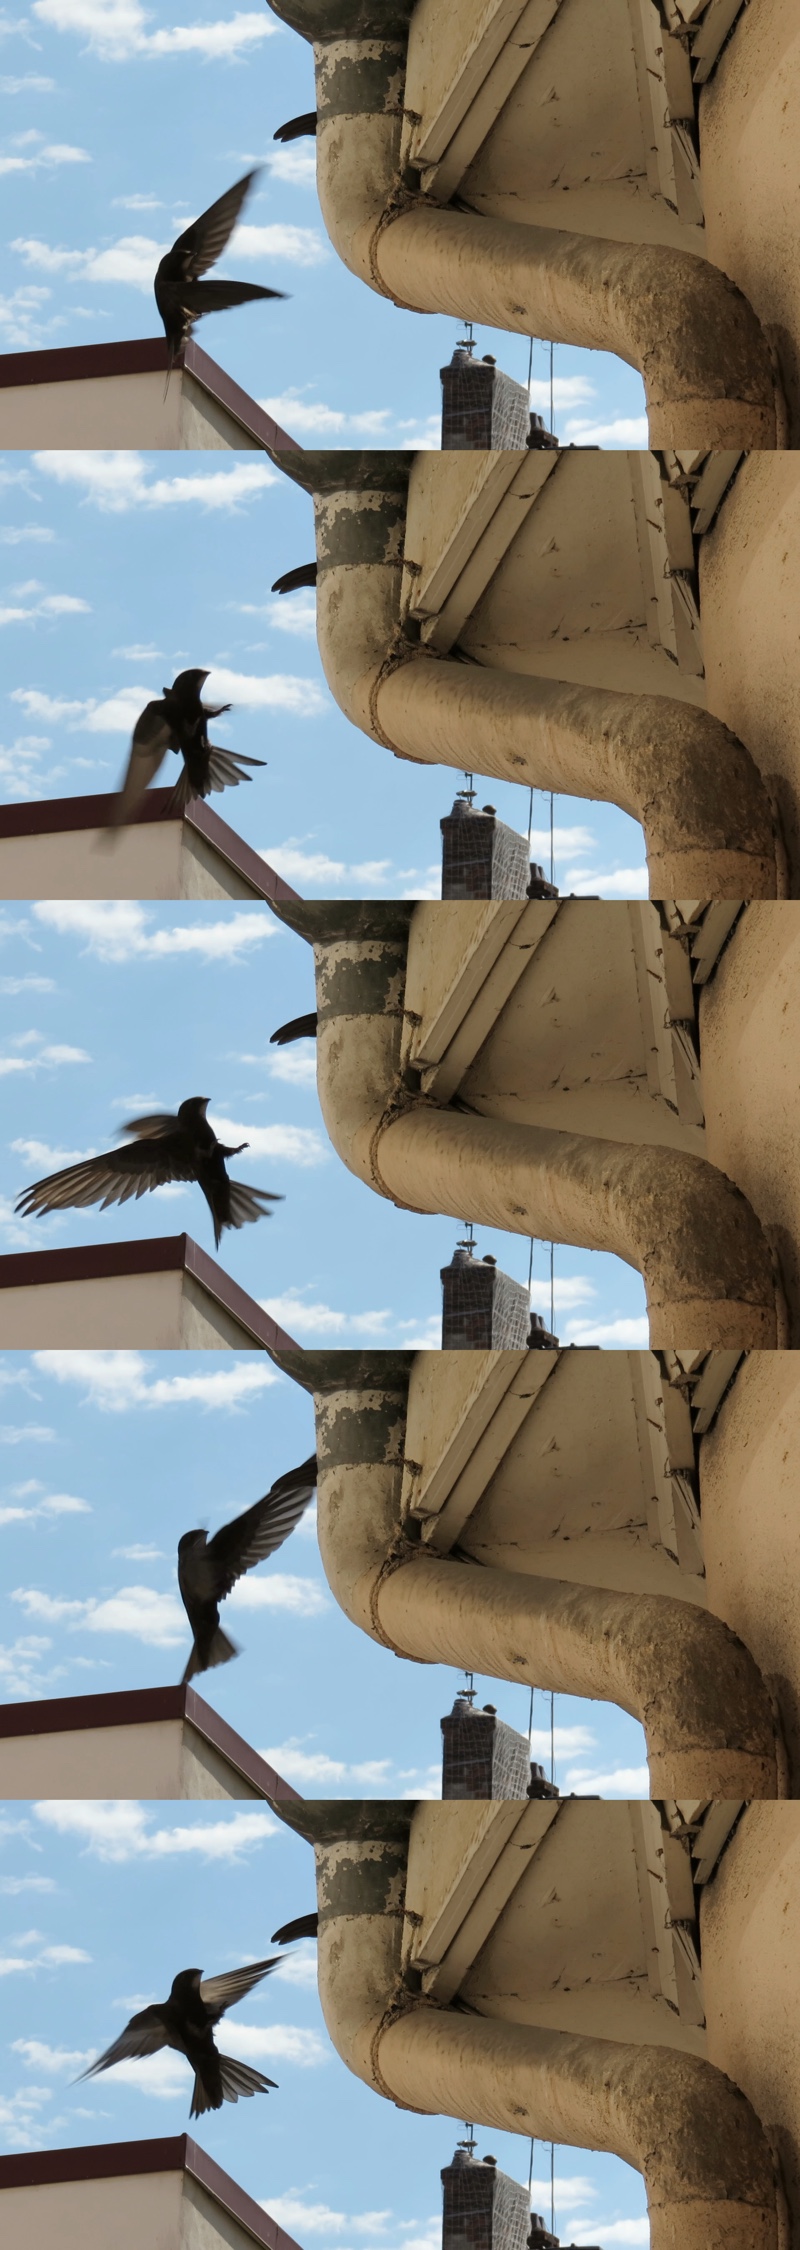 Sequence from film showing a bird approaching the gutter.